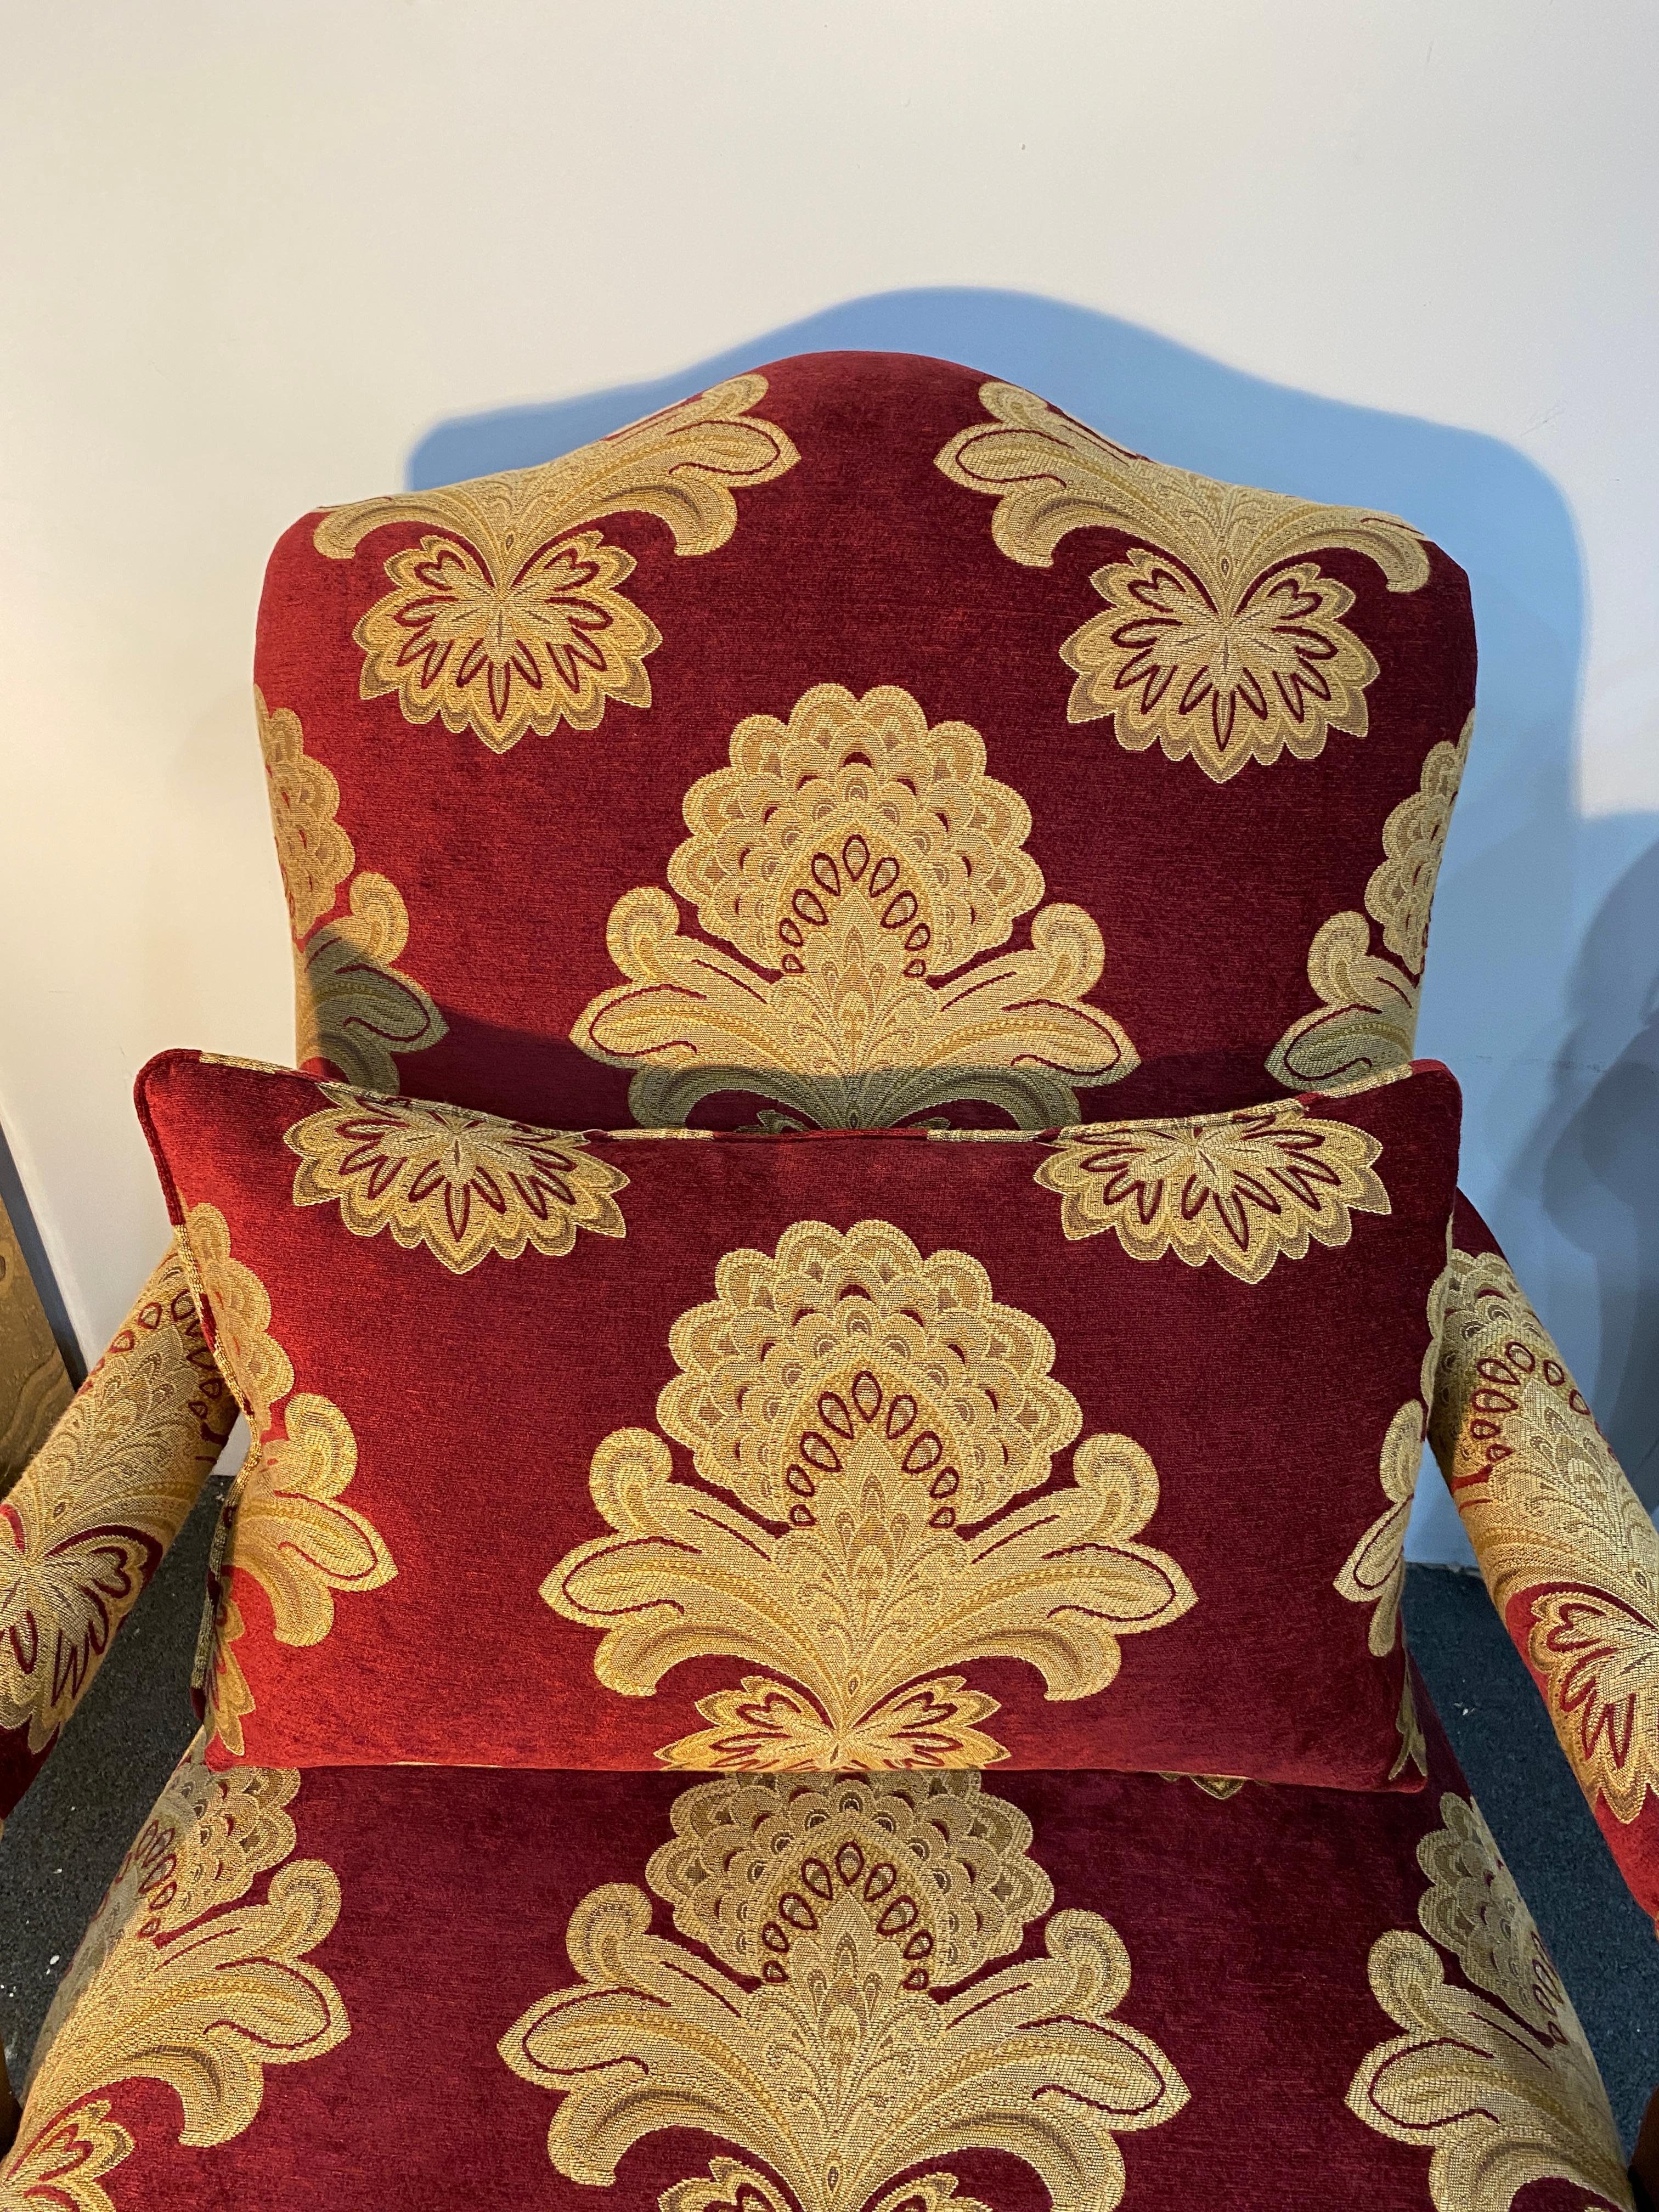 Stunning pair of bergère armchairs or lounge chairs made in the grand French Louis XV style. Featuring large carved frames in the style and scale of a marquise bergère with neoclassical motifs decorating the seat. The back gracefully curves down to